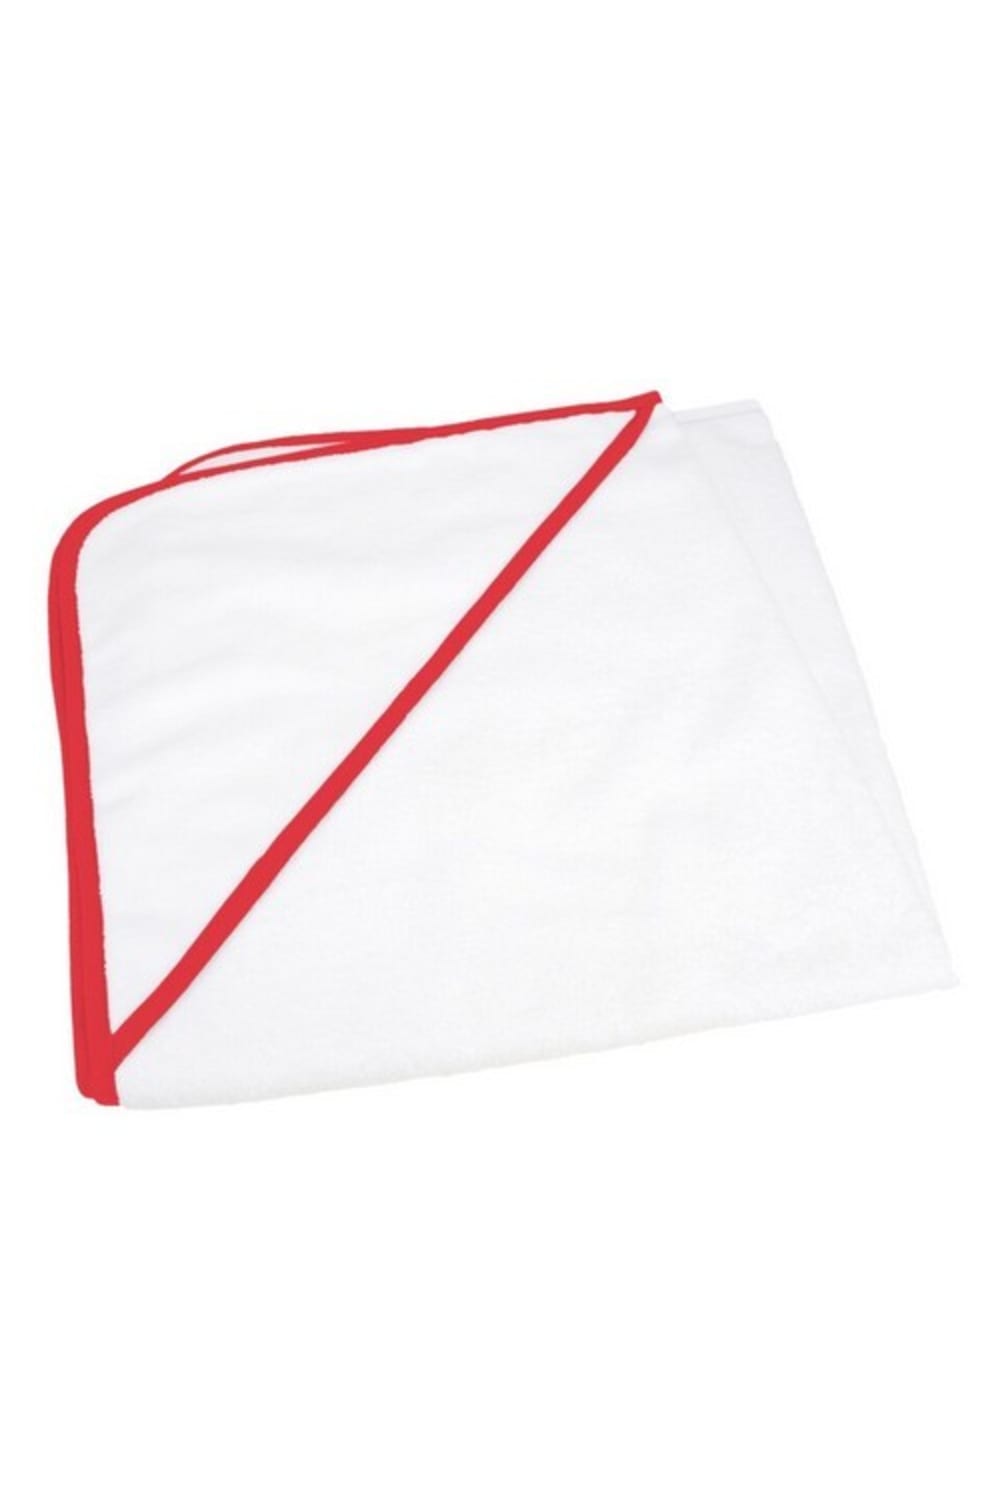 A&R Towels Baby/Toddler Babiezz All-over Sublimation Hooded Towel (White/ Fire Red) (One Size)